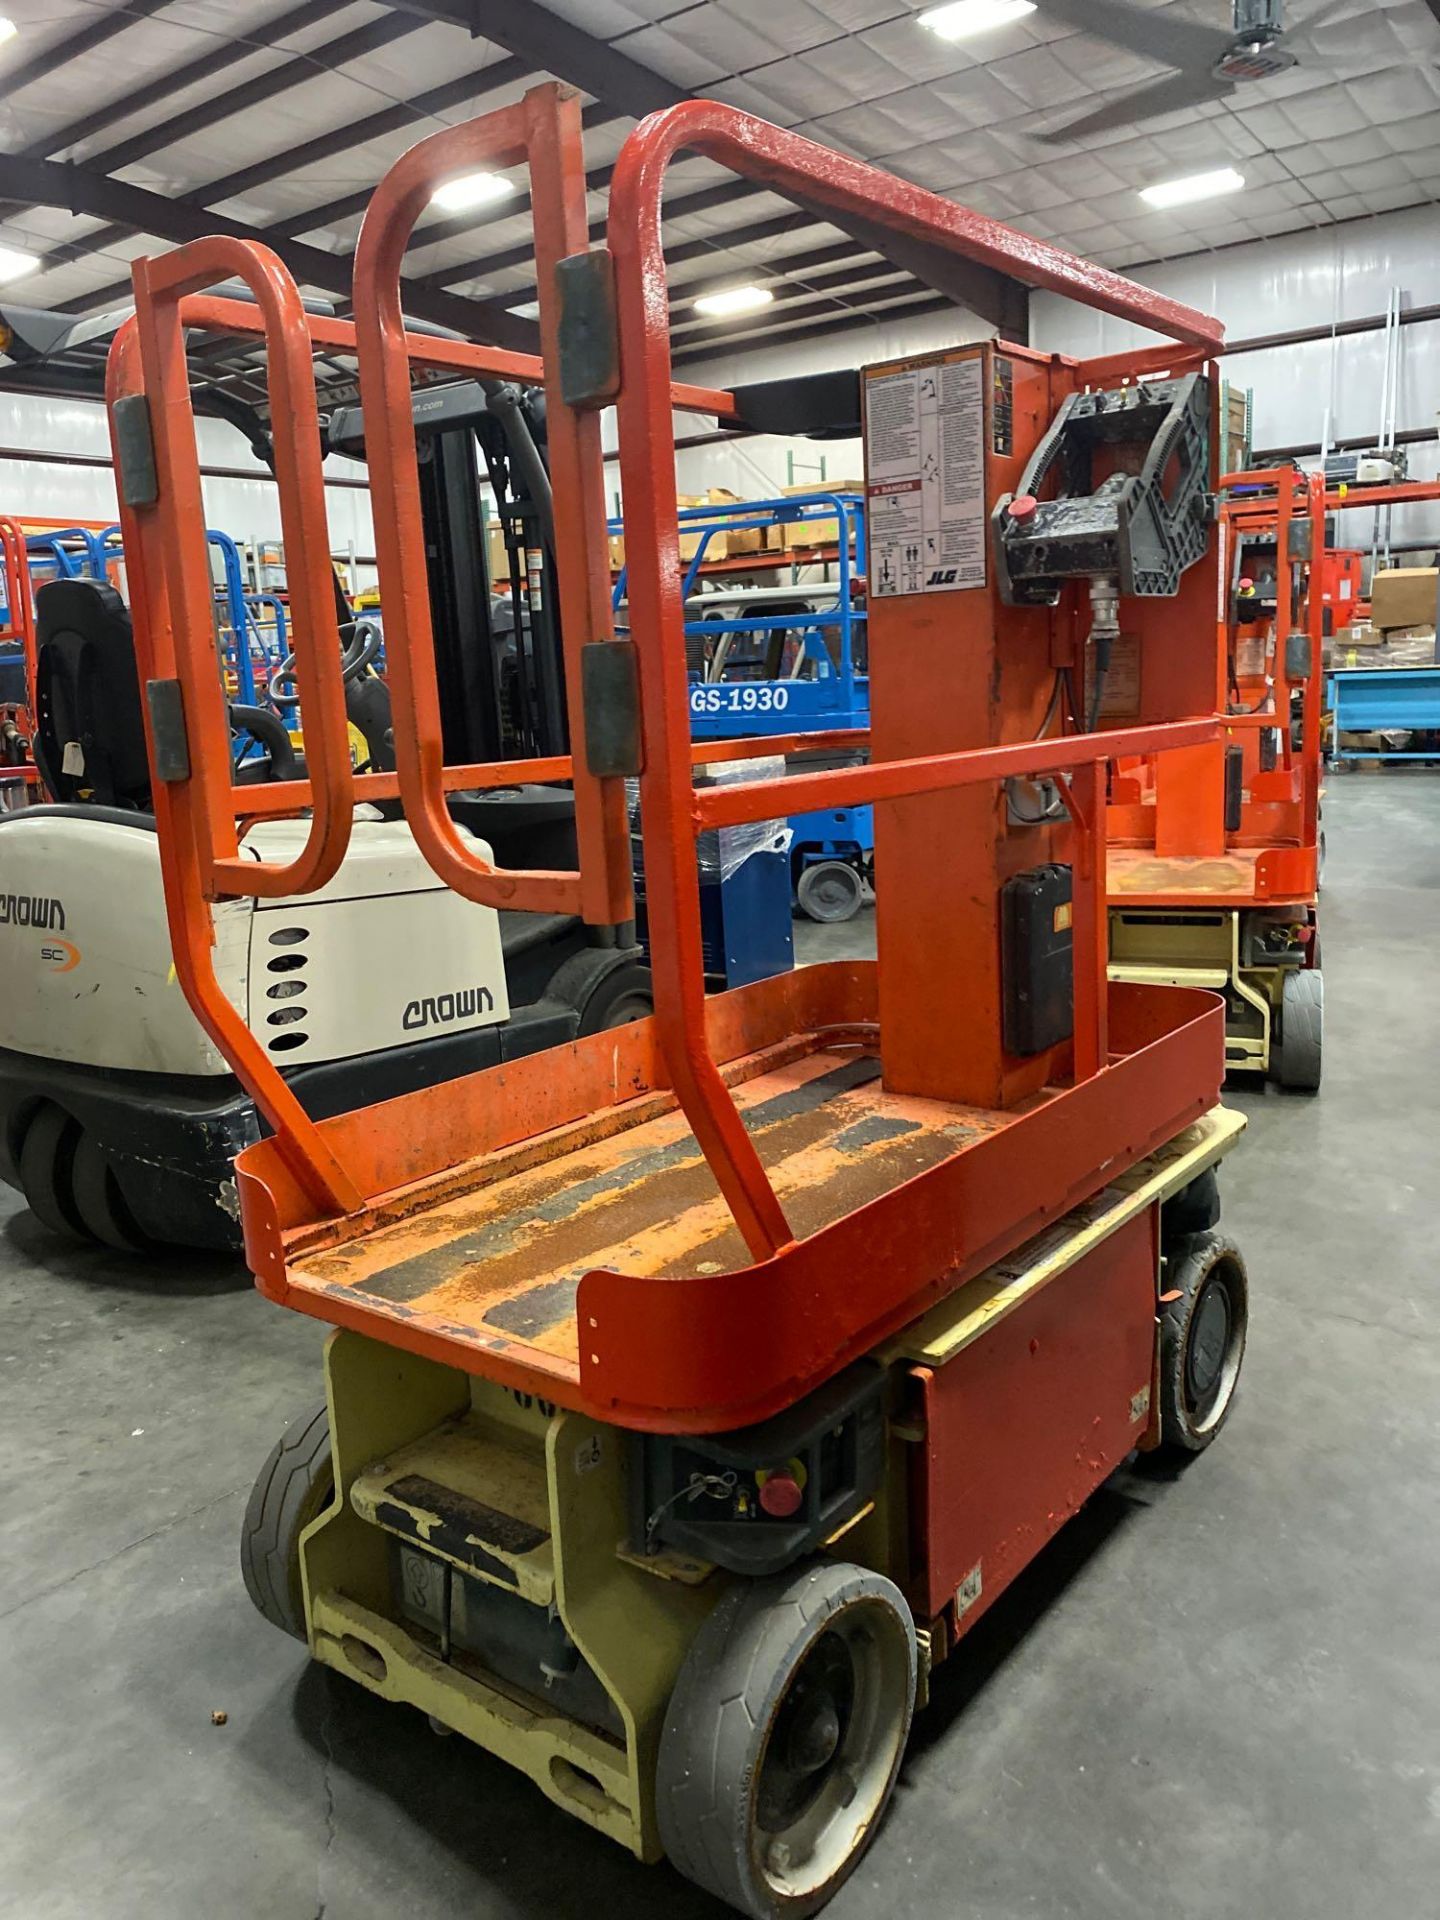 JLG 1230ES ELECTRIC MAN LIFT, SELF PROPELLED, BUILT IN BATTERY CHARGER, 12' PLATFORM HEIGHT, 444 HOU - Image 4 of 6